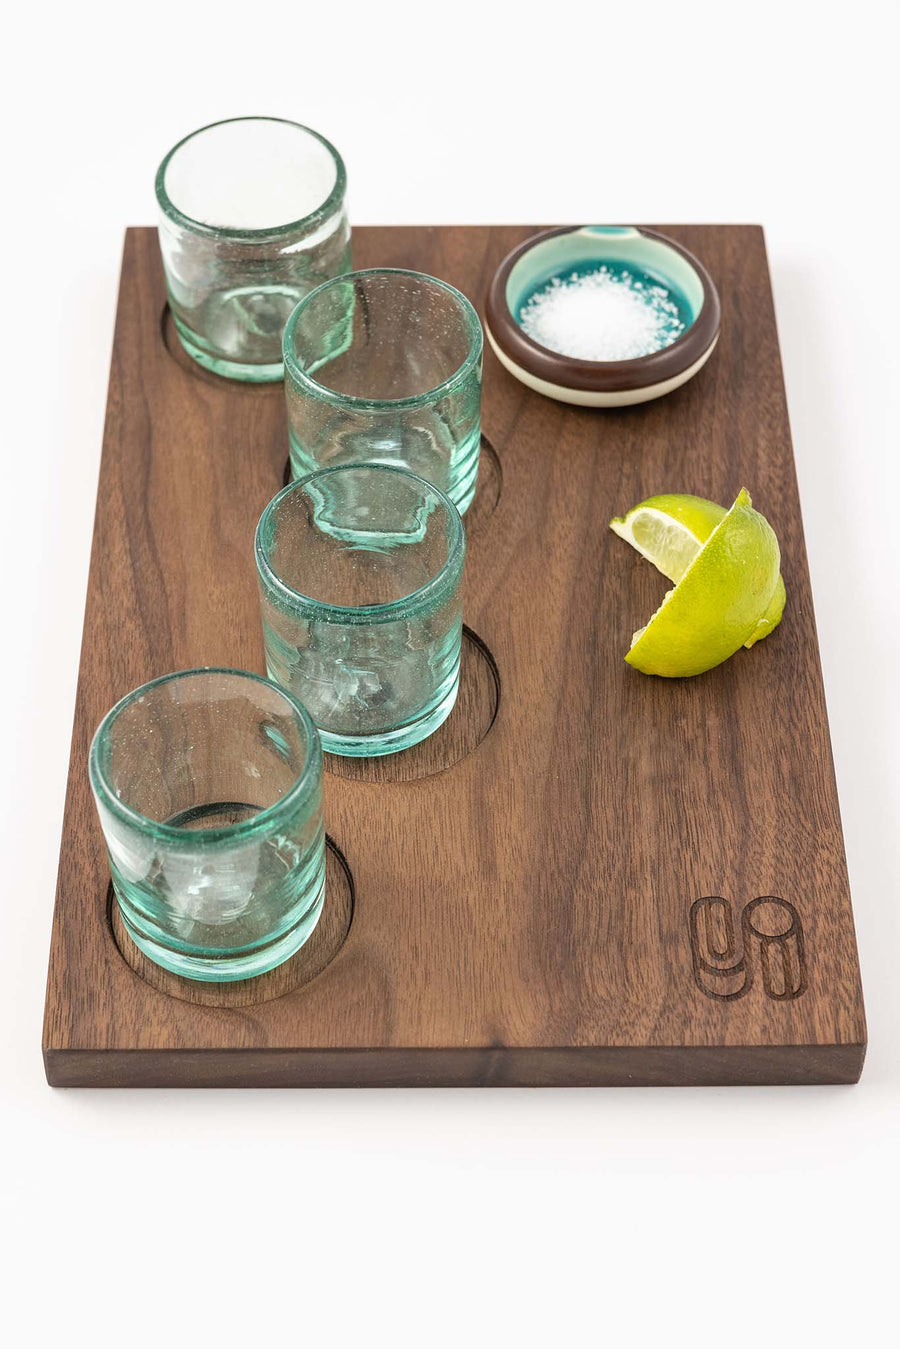 Marfa Nights Hand Blown Shot Glasses and Flight tray featuring Sound as Ever logo and set with lime and salt